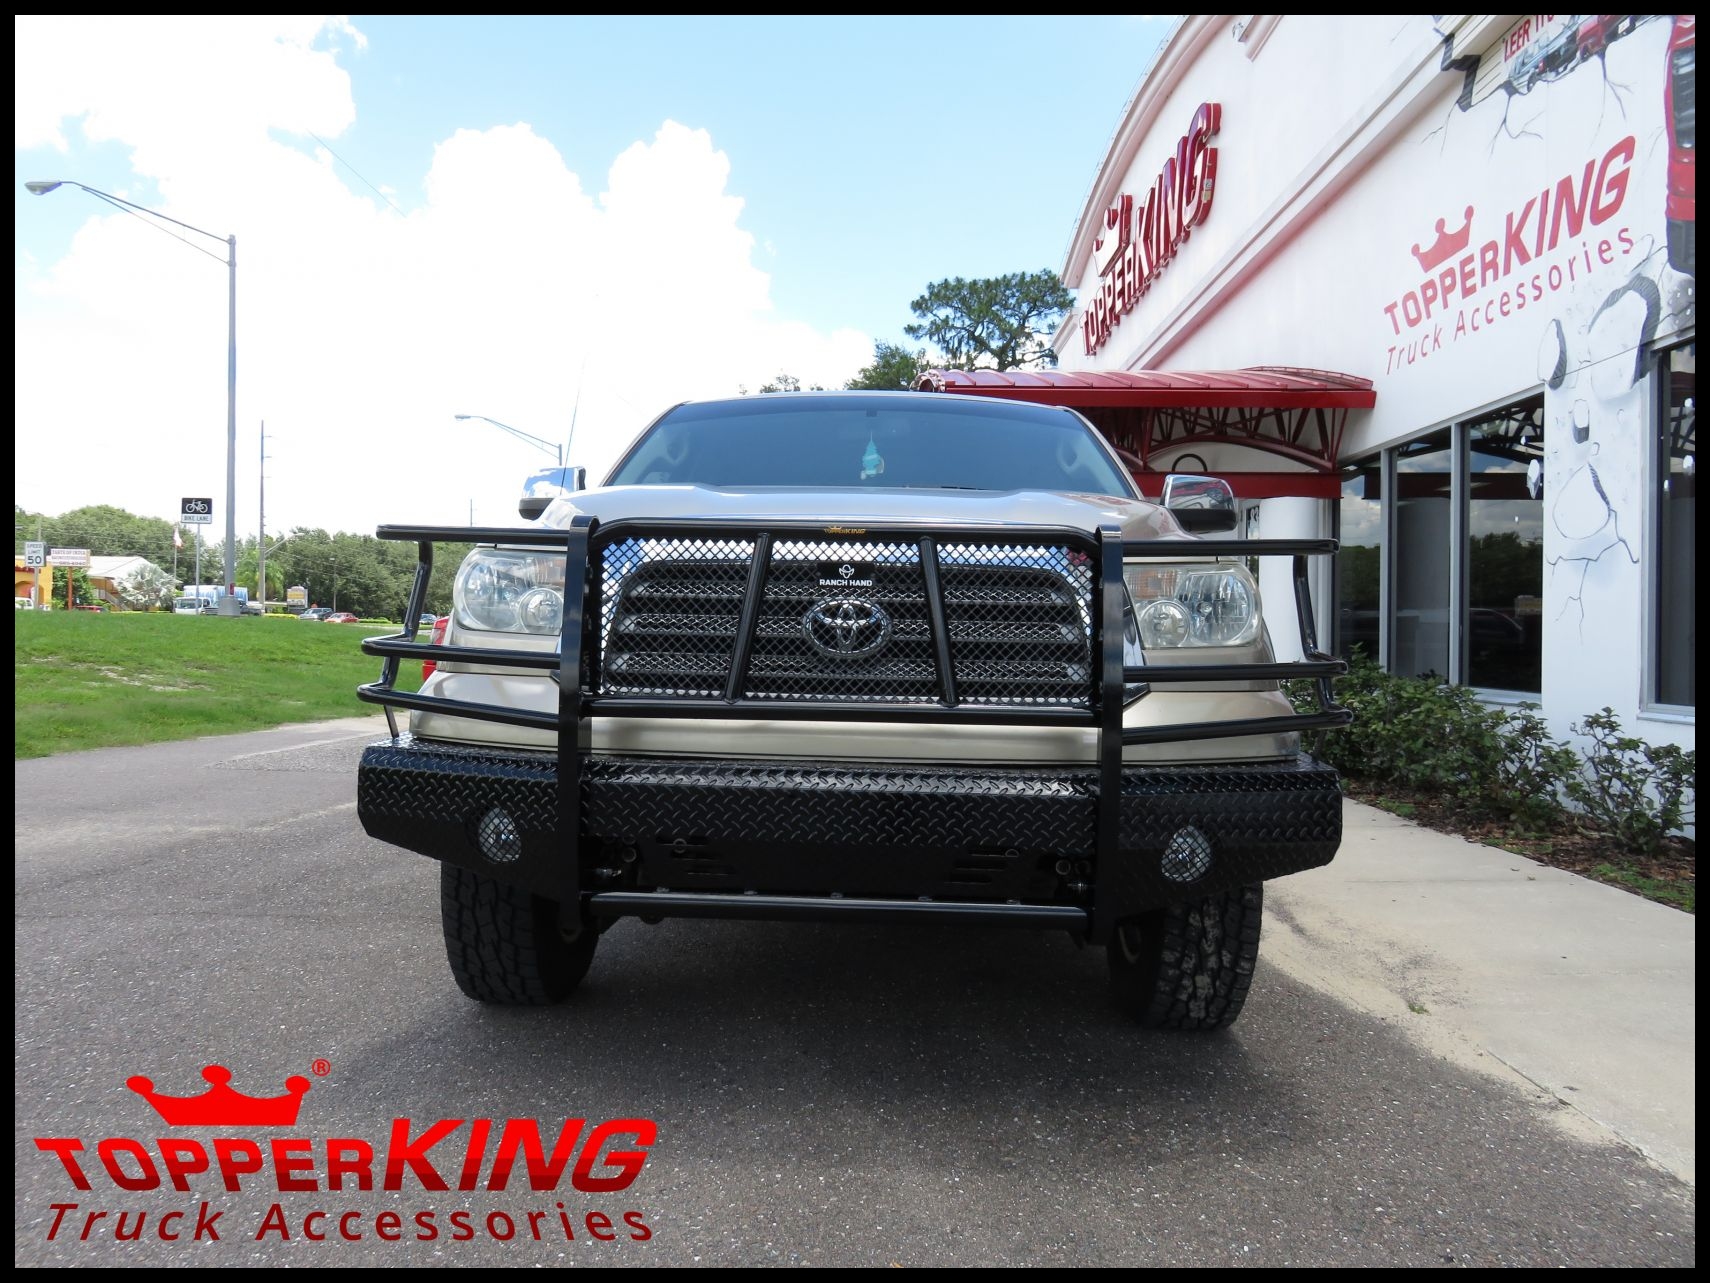 2010 Toyota Tundra updated with RanchHand Bumper and chrome accessories by TopperKING in Brandon FL